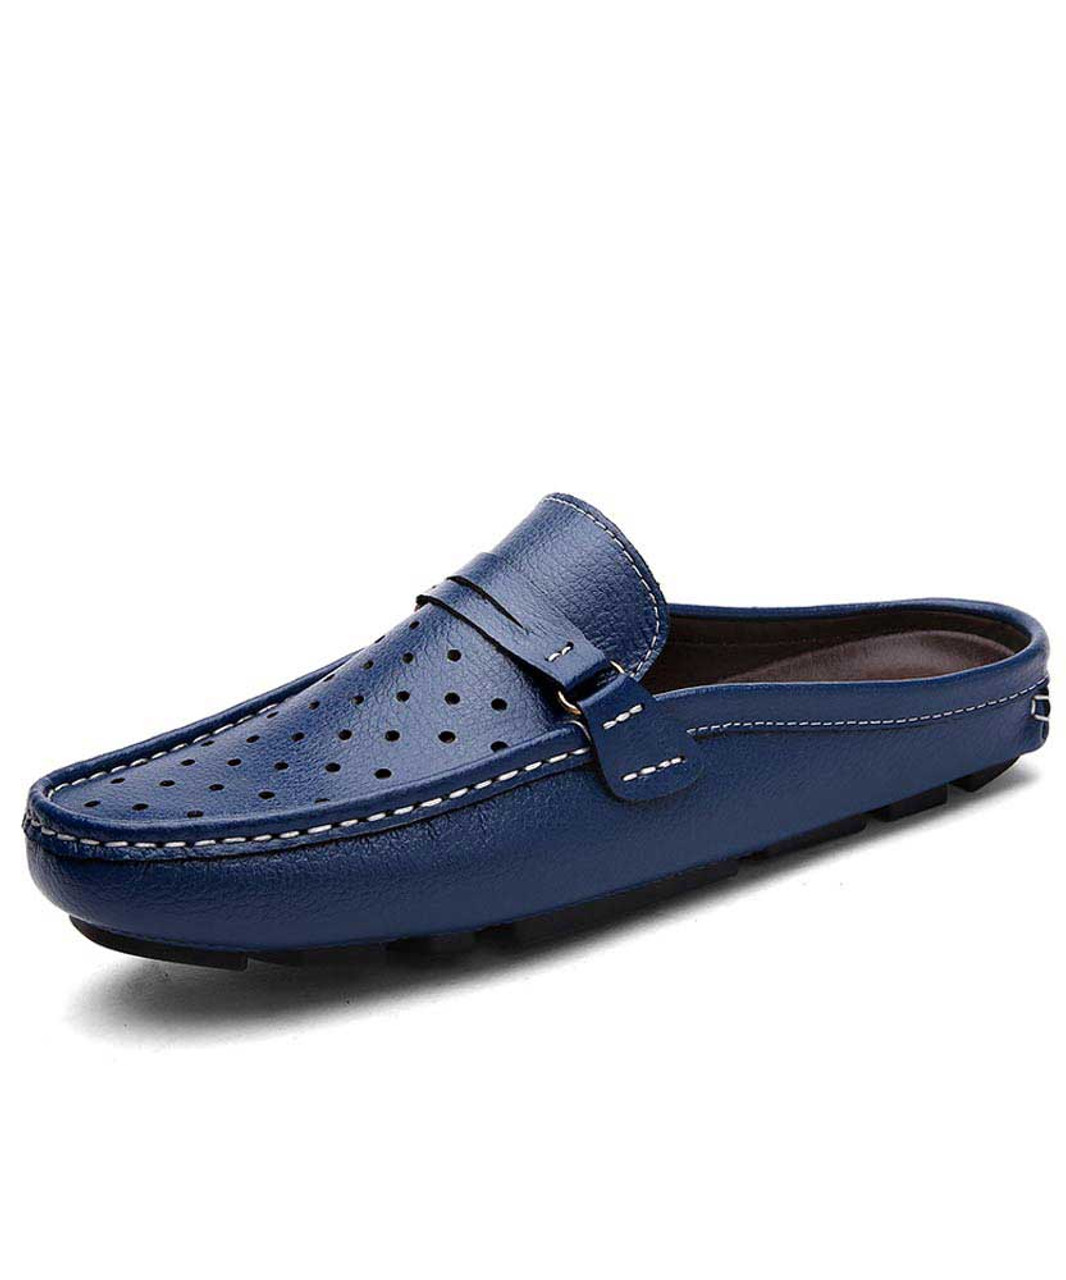 mens blue leather slip on shoes